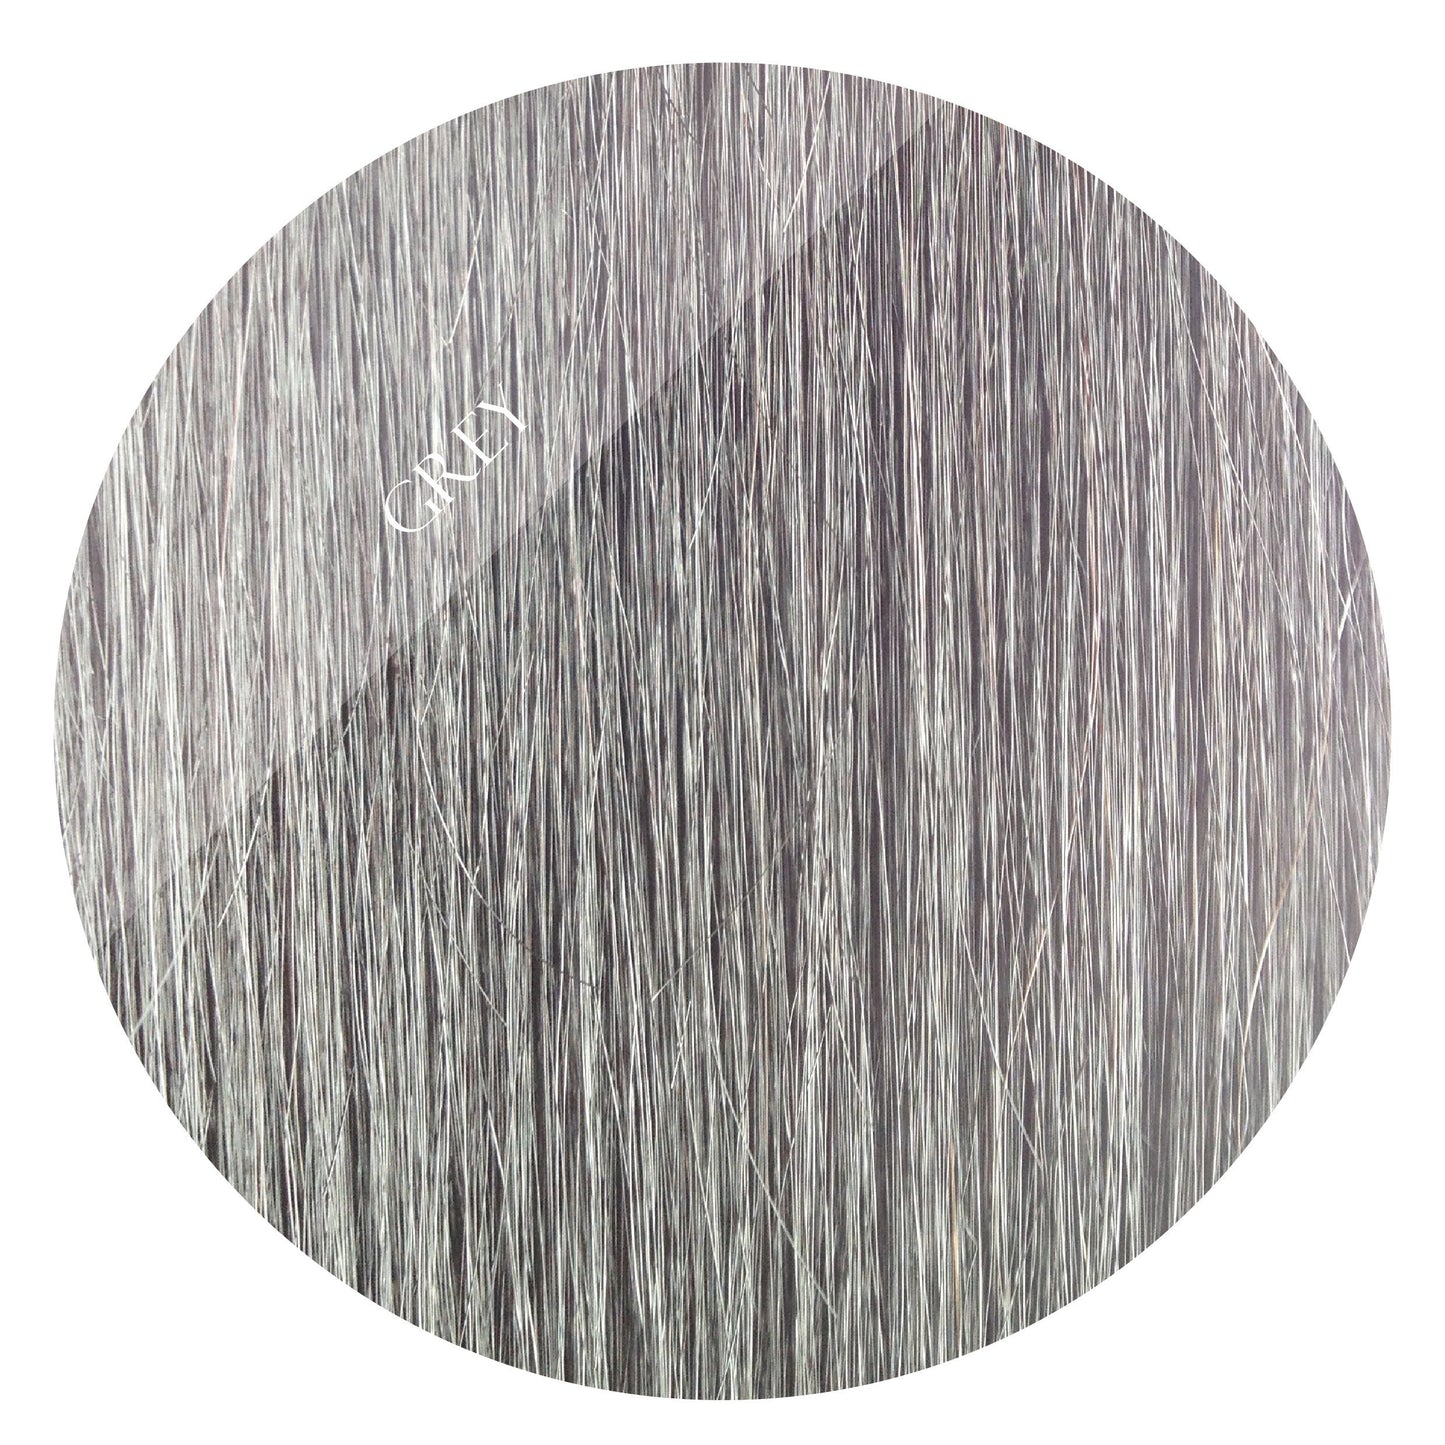 grey storm tape hair extensions 26inch 80pcs - two full heads